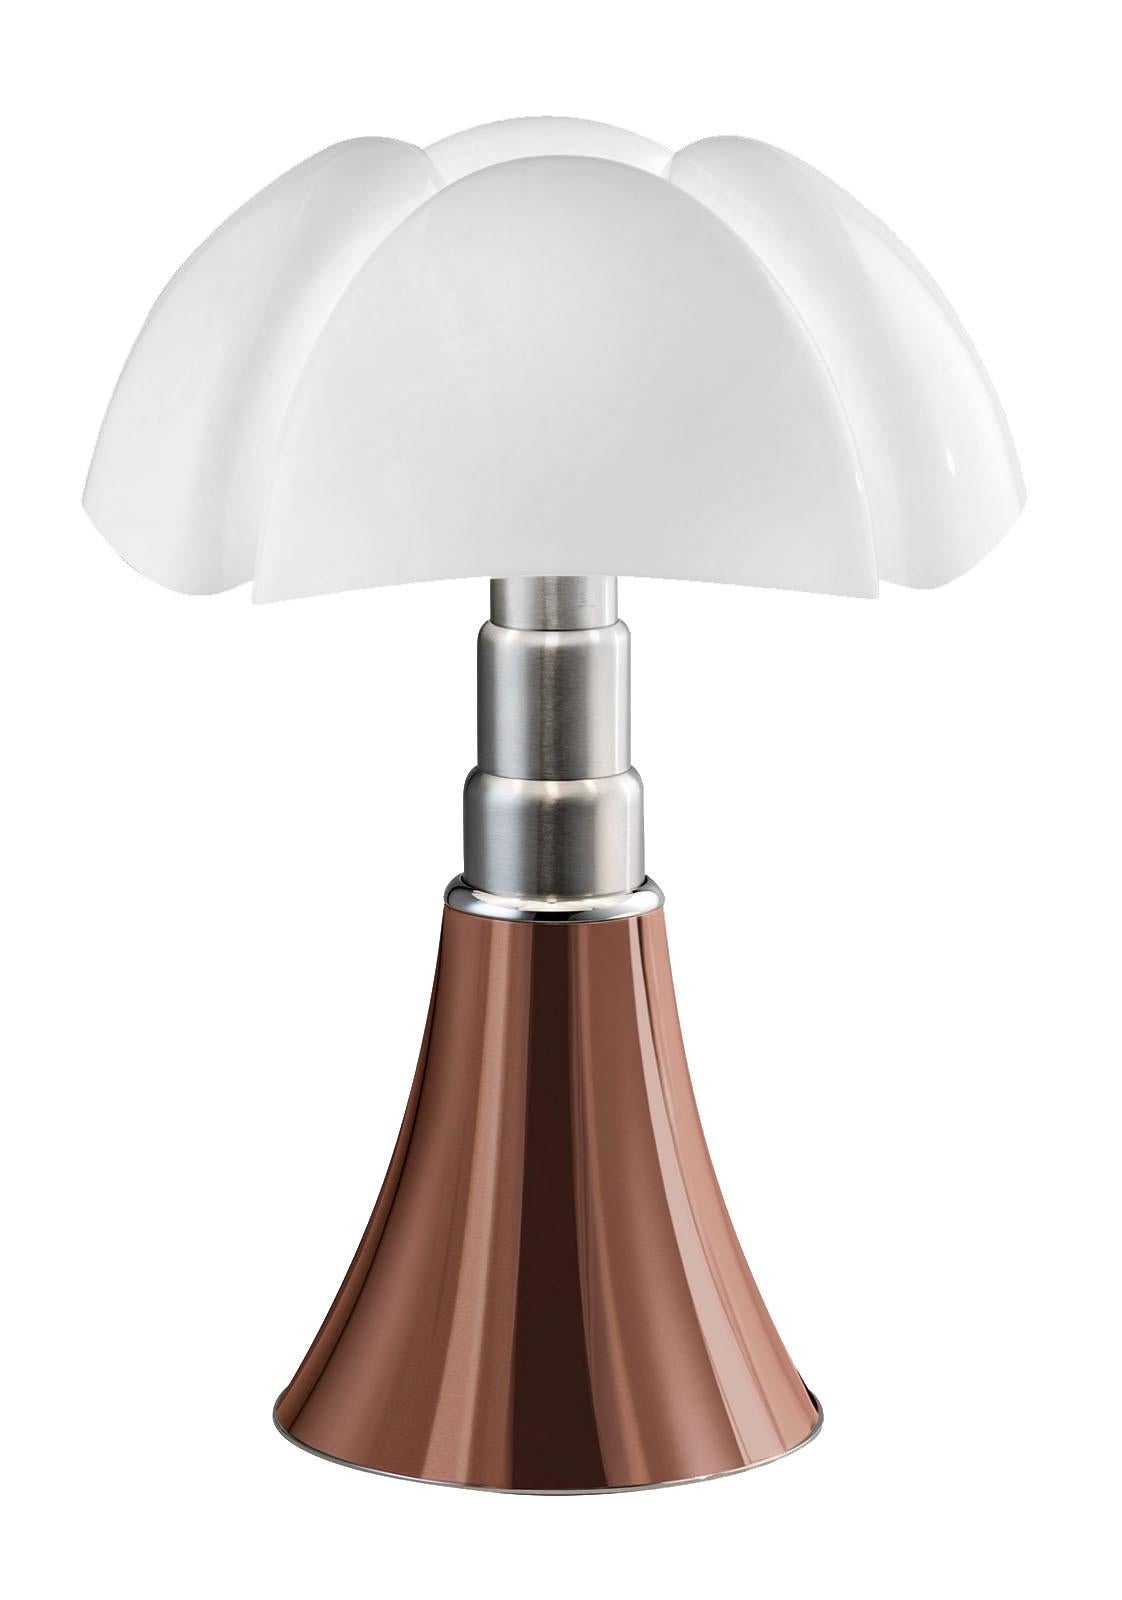 For Sale: Orange (Rame) Martinelli Luce Dimmable LED Pipistrello 620 Table Lamp by Gae Aulenti